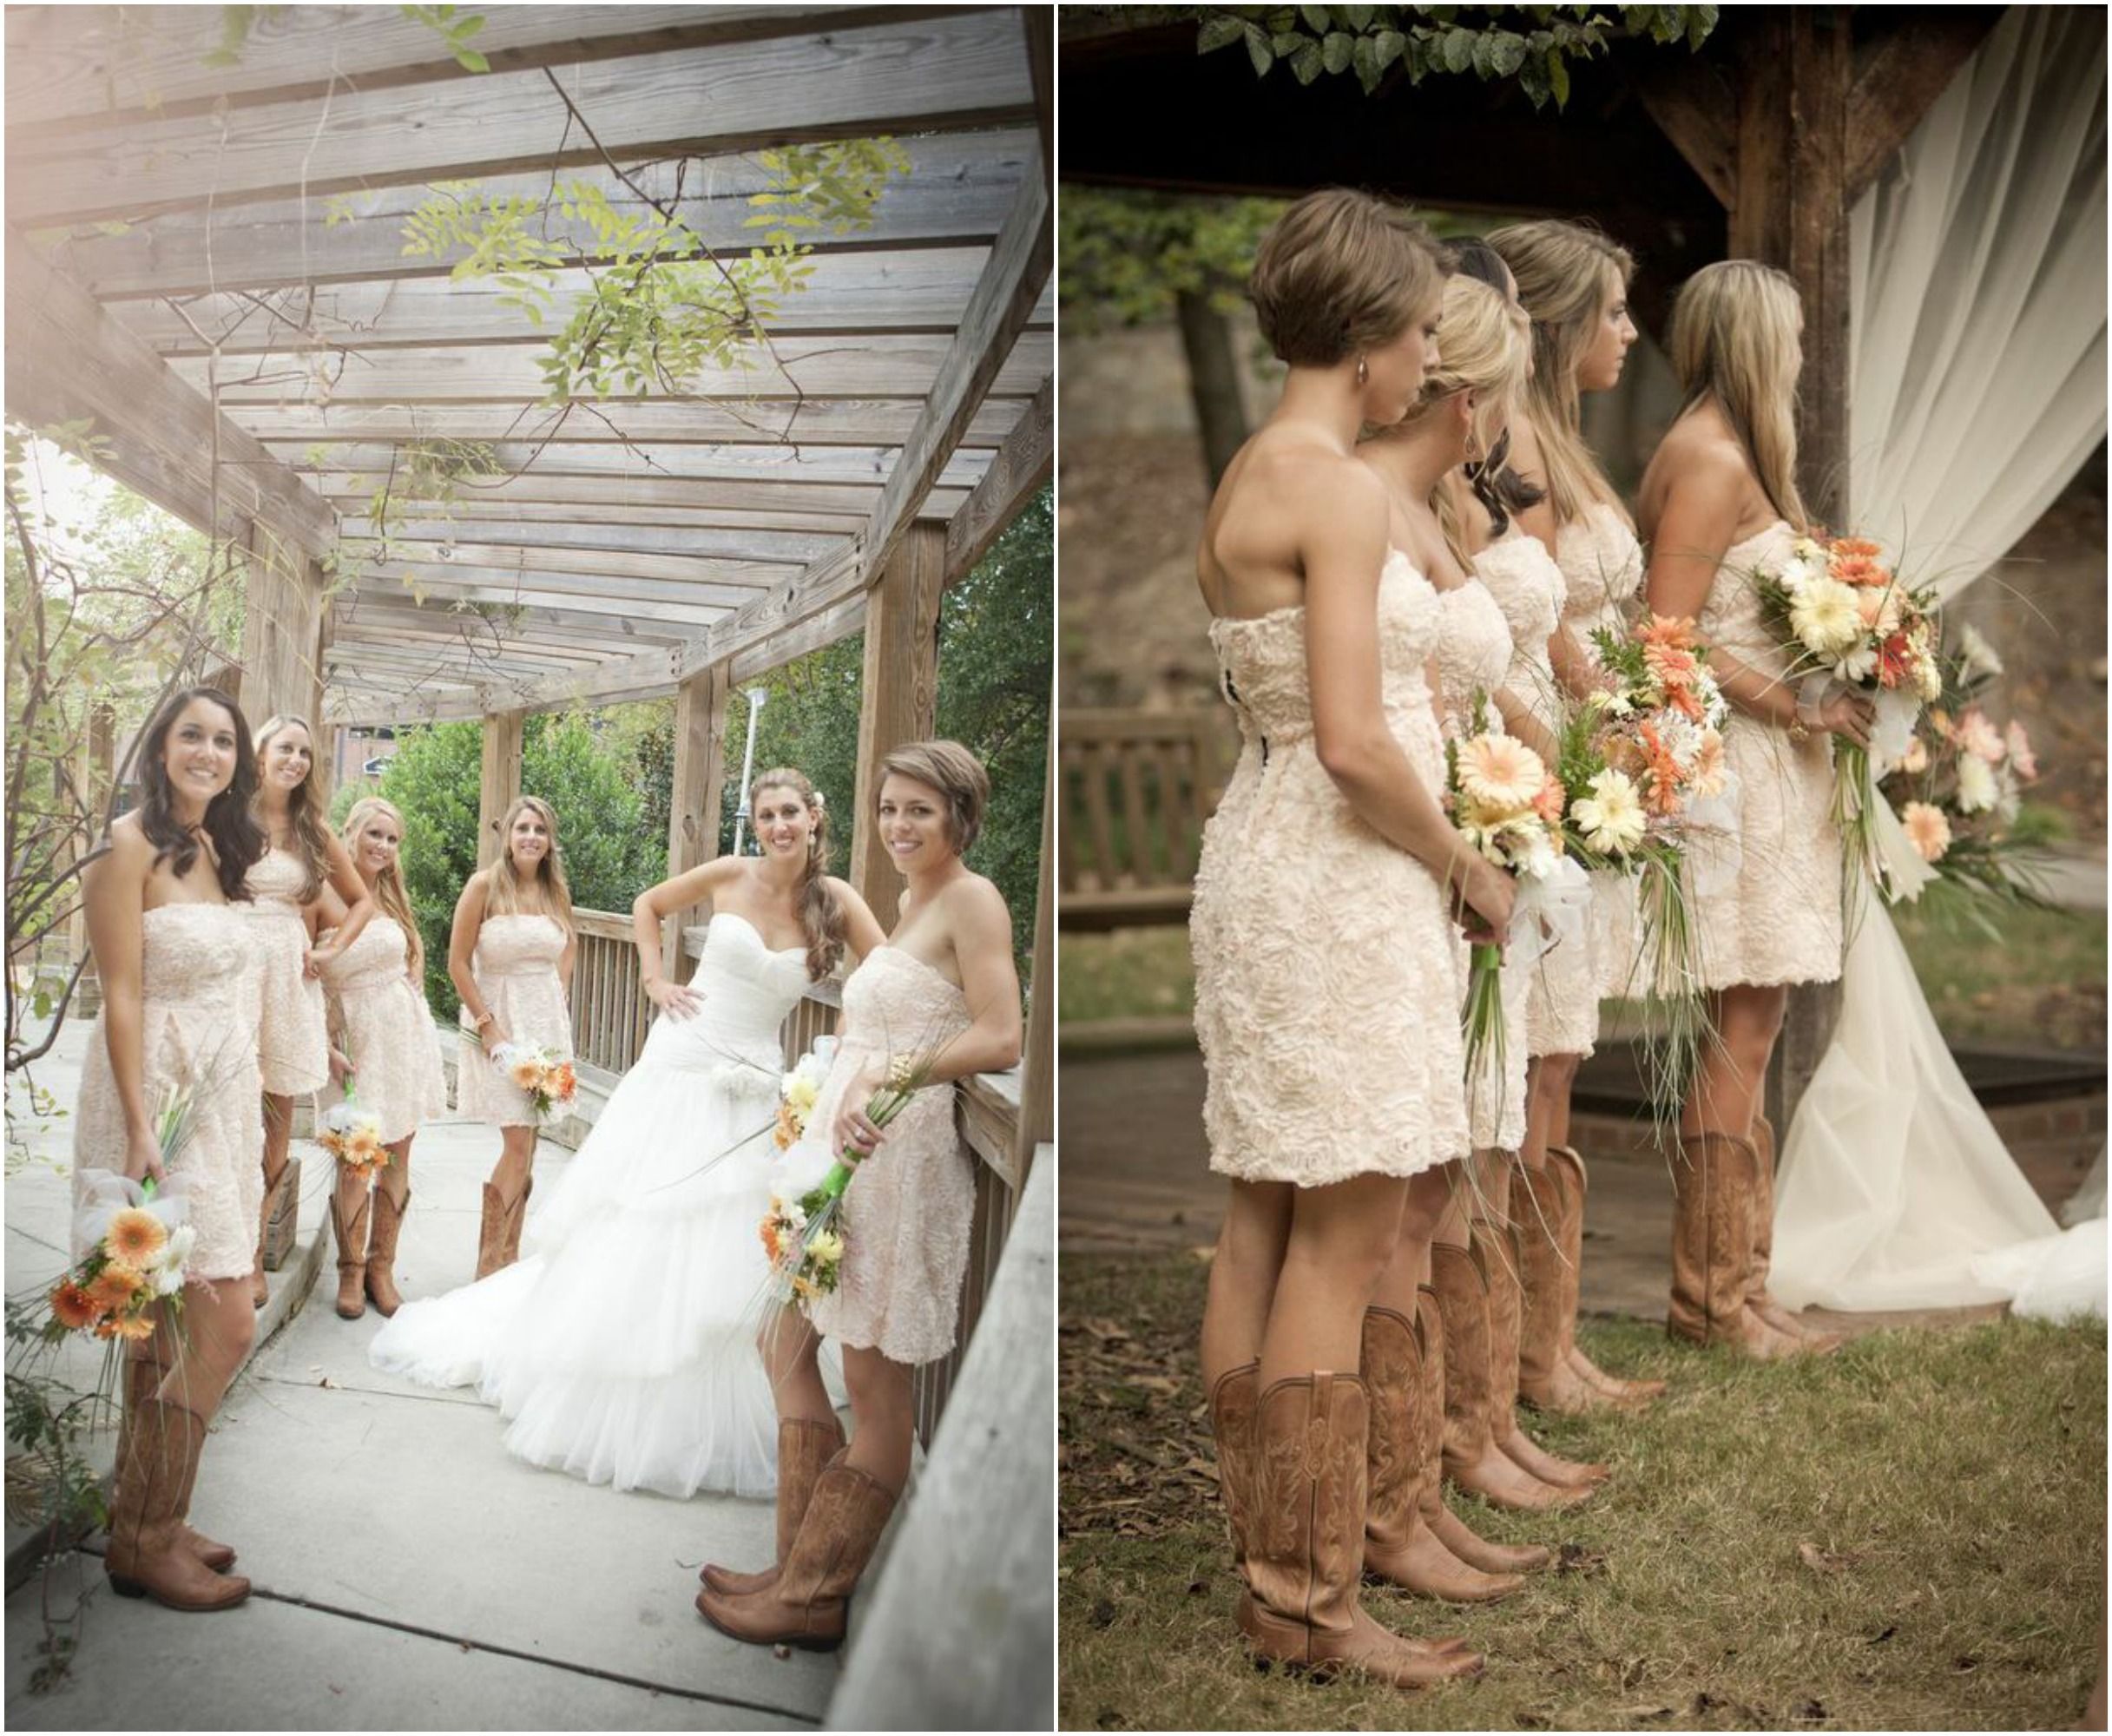 wedding dress and boots | Rustic Wedding With Bridesmaids In Cowboy Boots – Rust